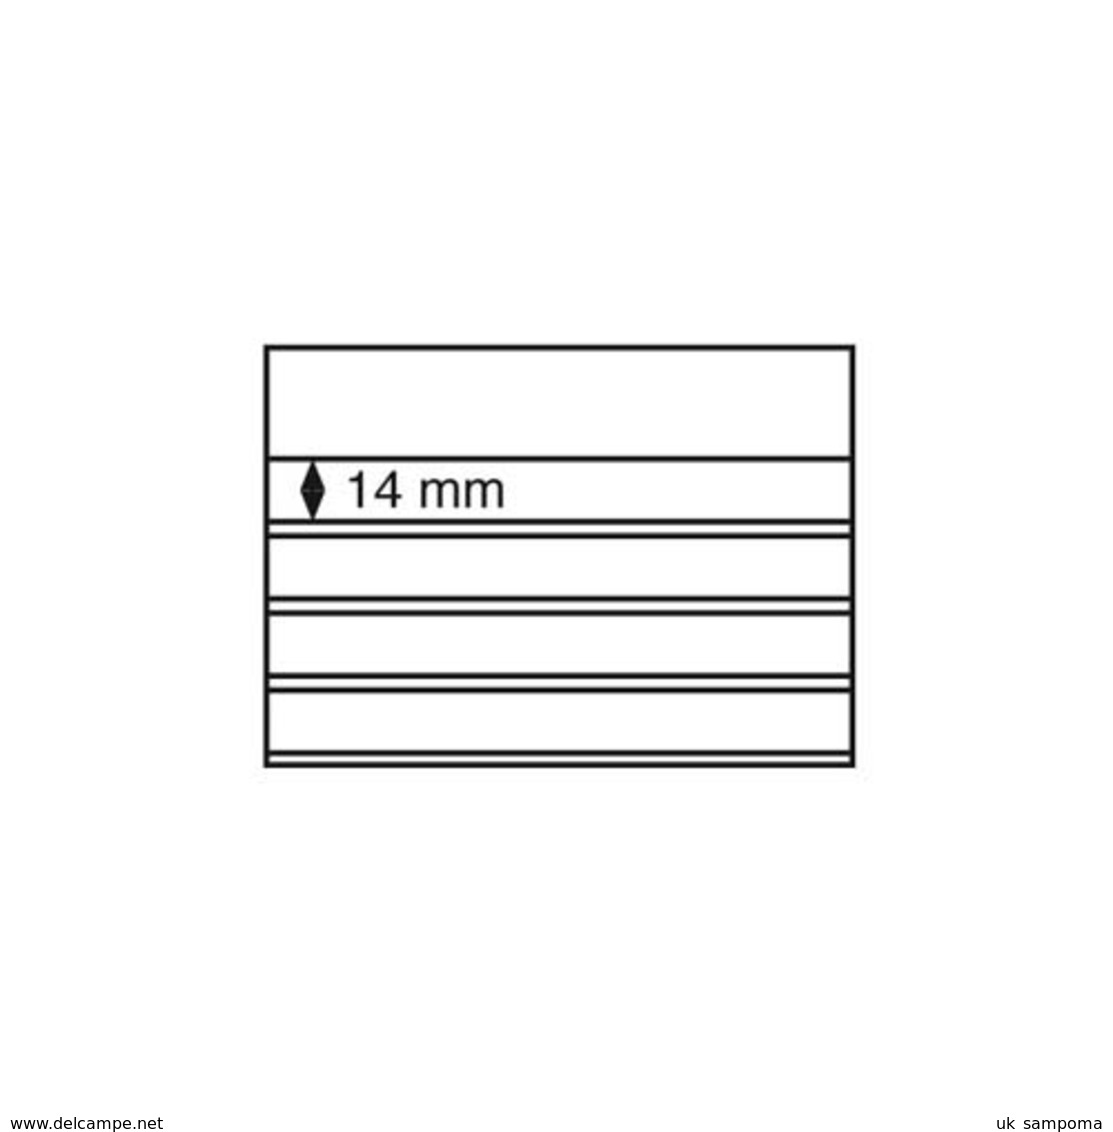 Standard Cards PVC 158x113 Mm,l4 Clear Strips With Cover Sheet, Black Card, 100 Per Pack - Verzamelmapjes